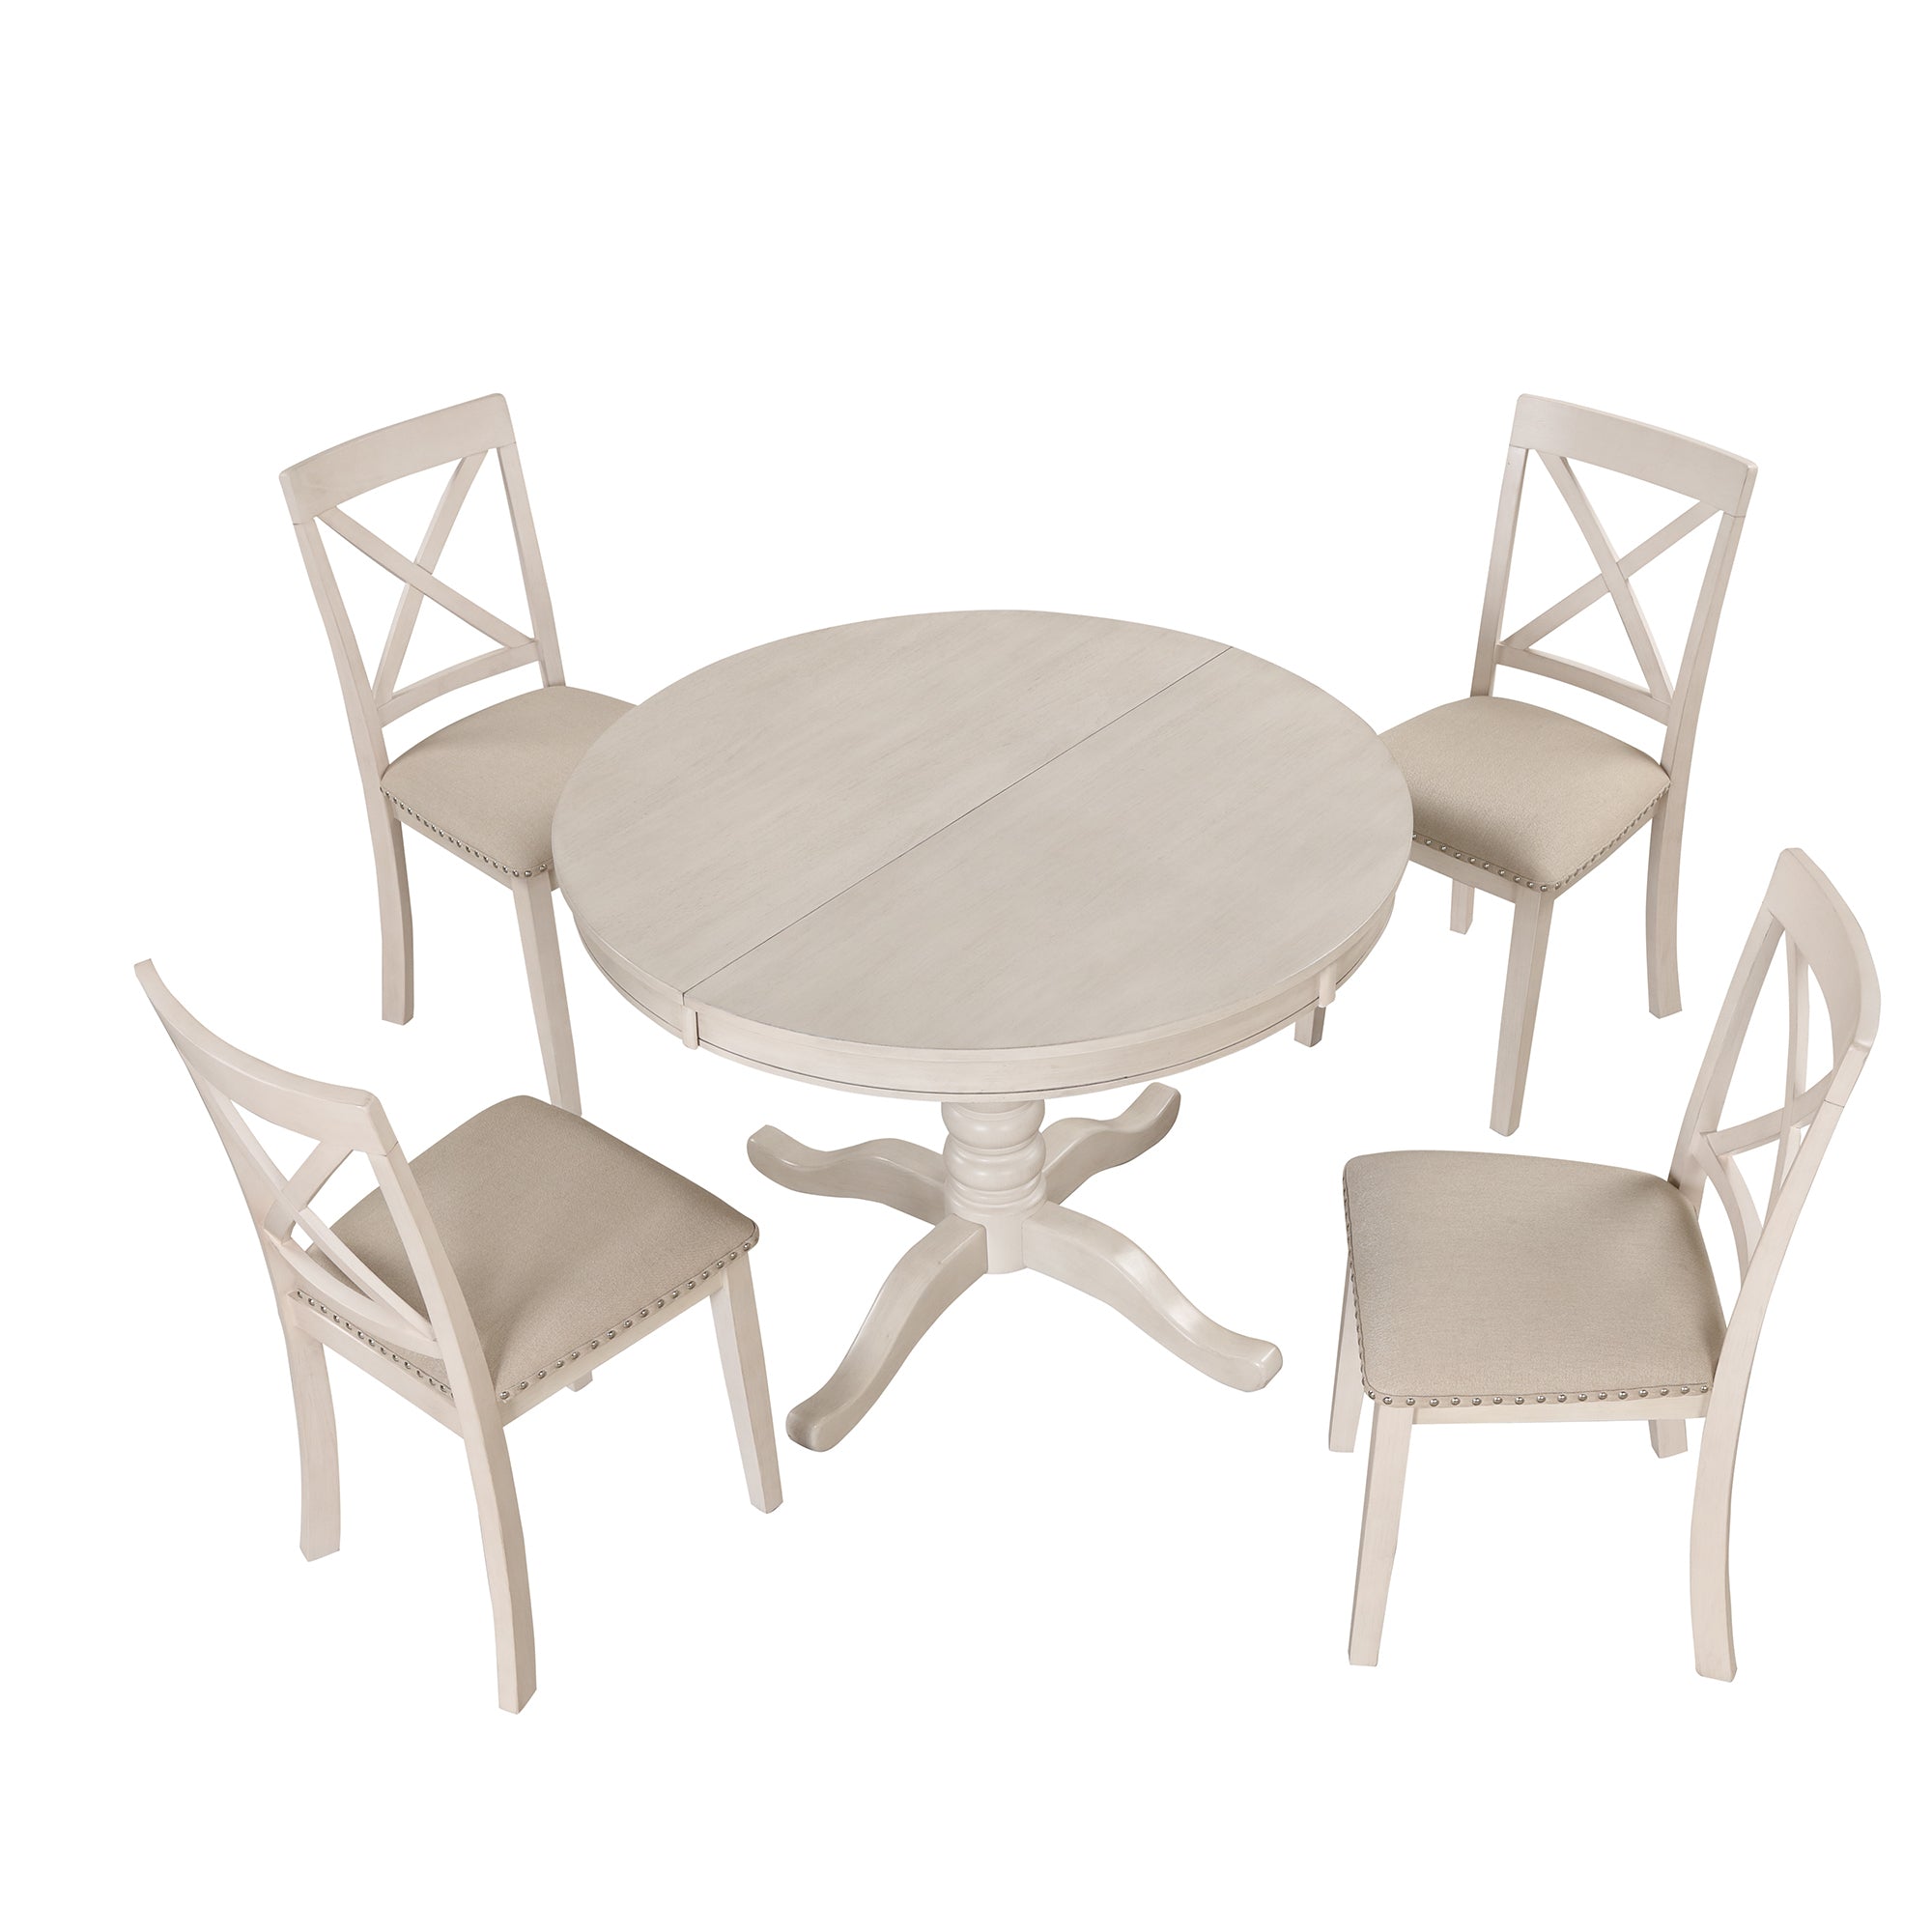 Round Table and 4 Kitchen Room Chairs